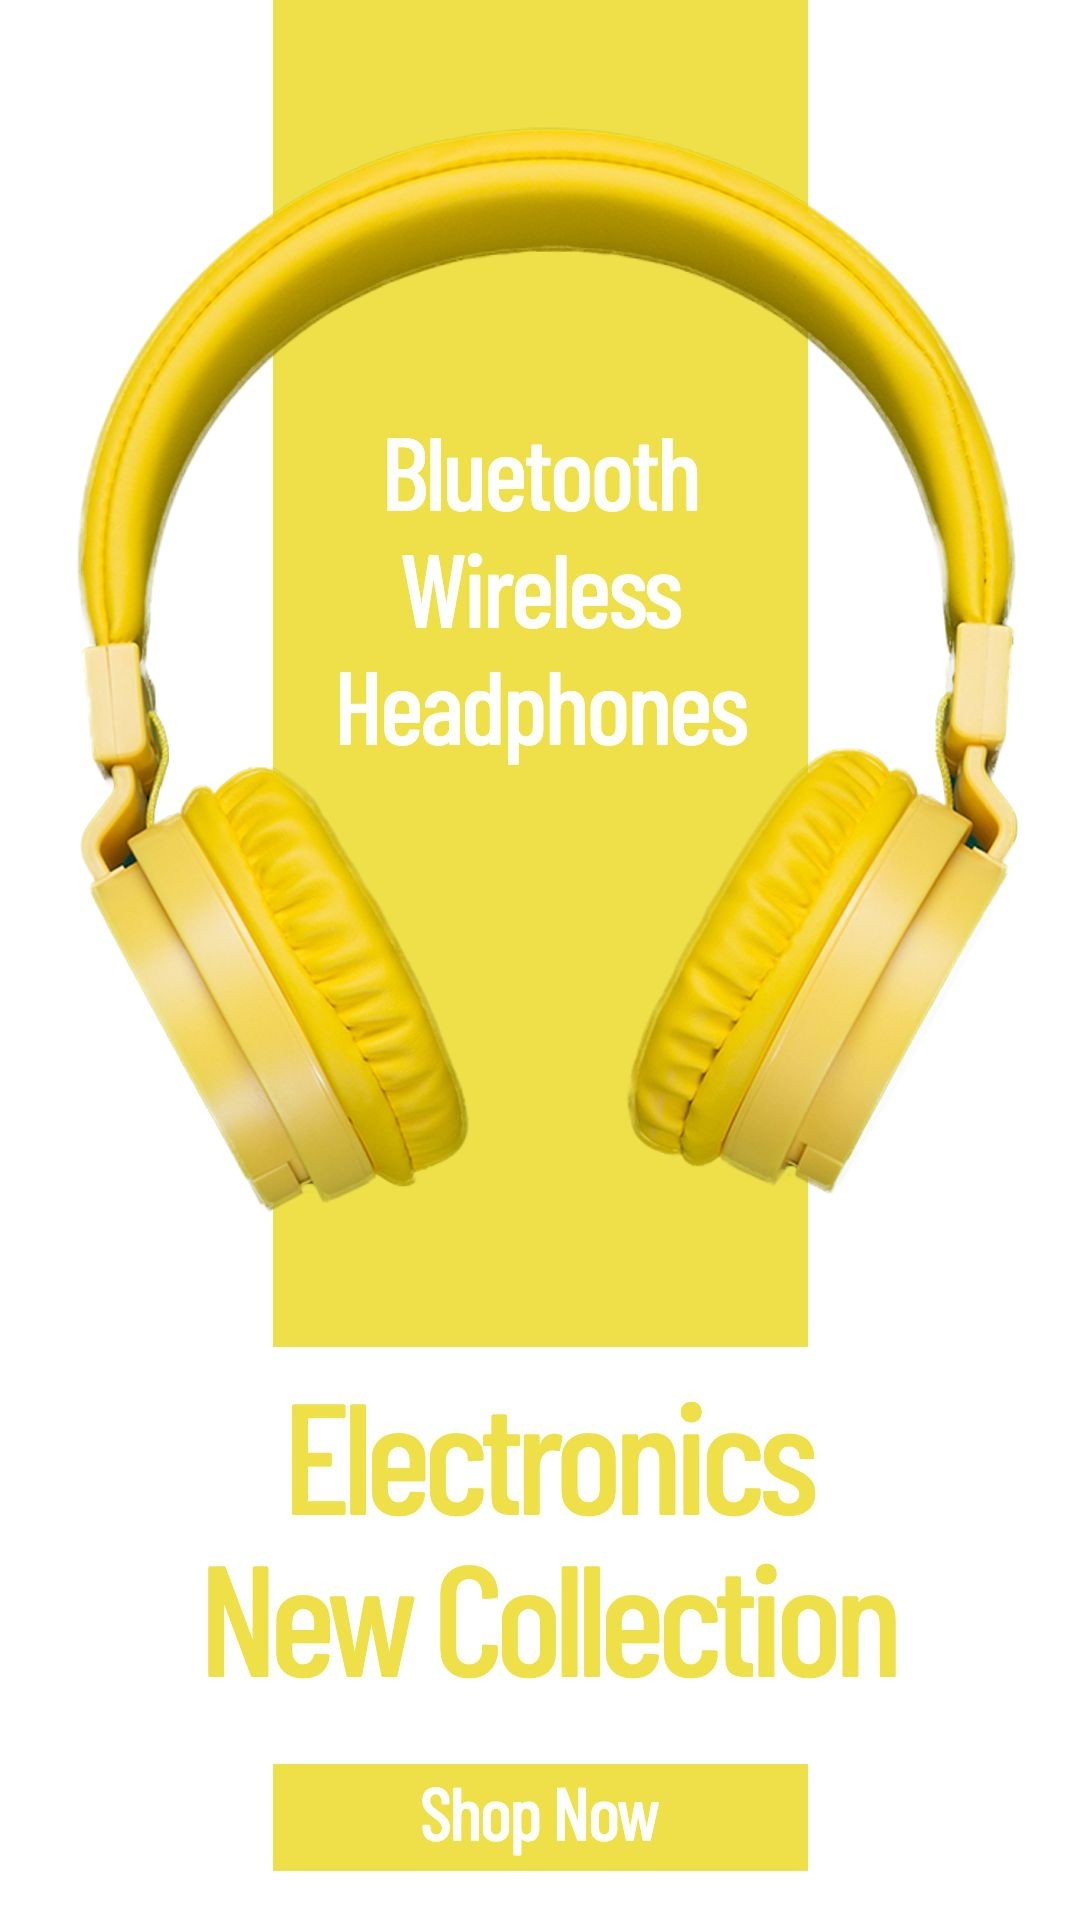 Yellow System Rectangle Headset New Arrival Display Ecommerce Story预览效果